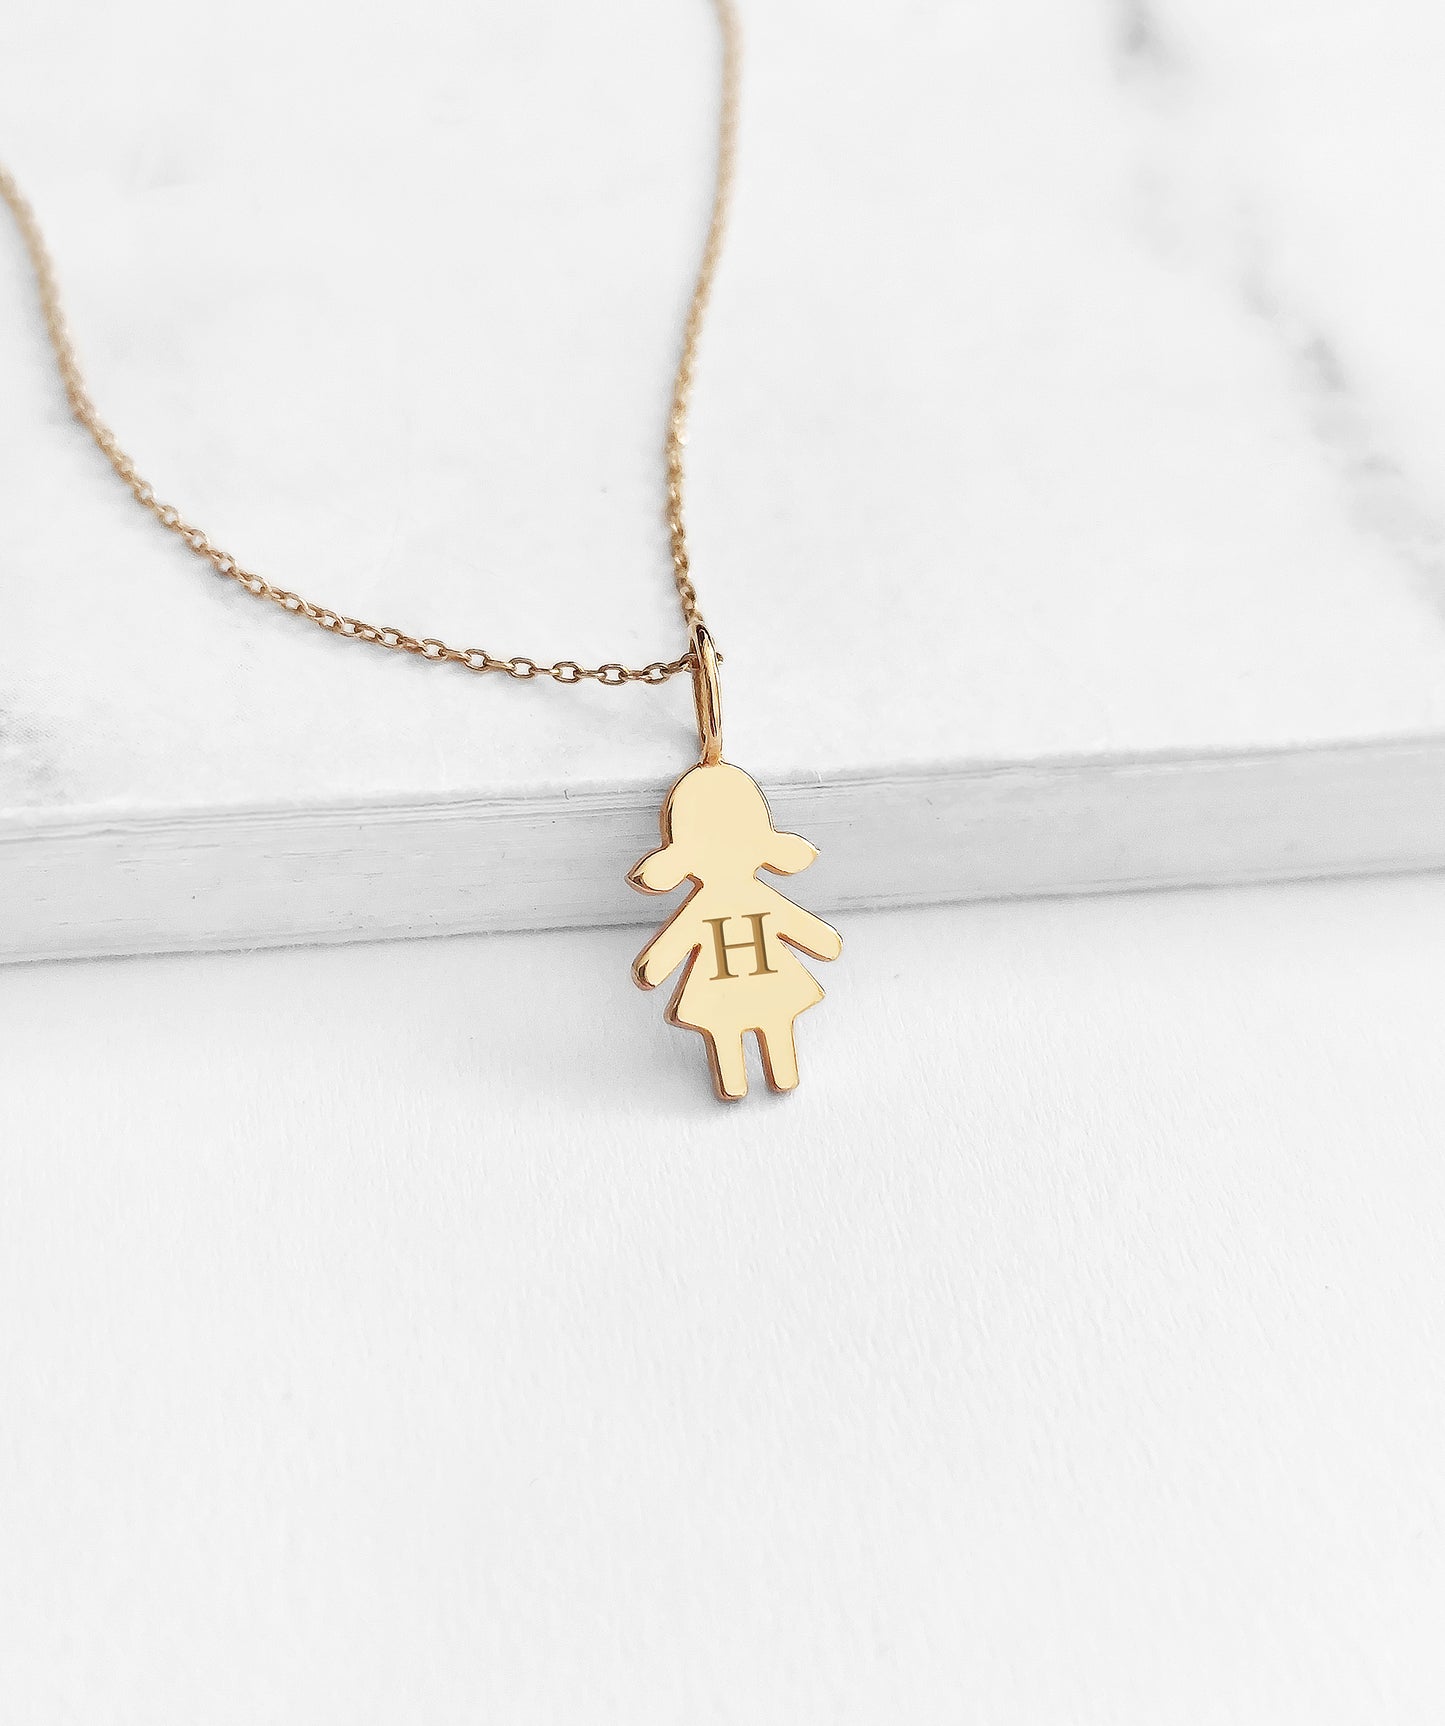 14K 9K Solid Gold Personalized Initial Tiny Girl Kid Pendant Charm Necklace